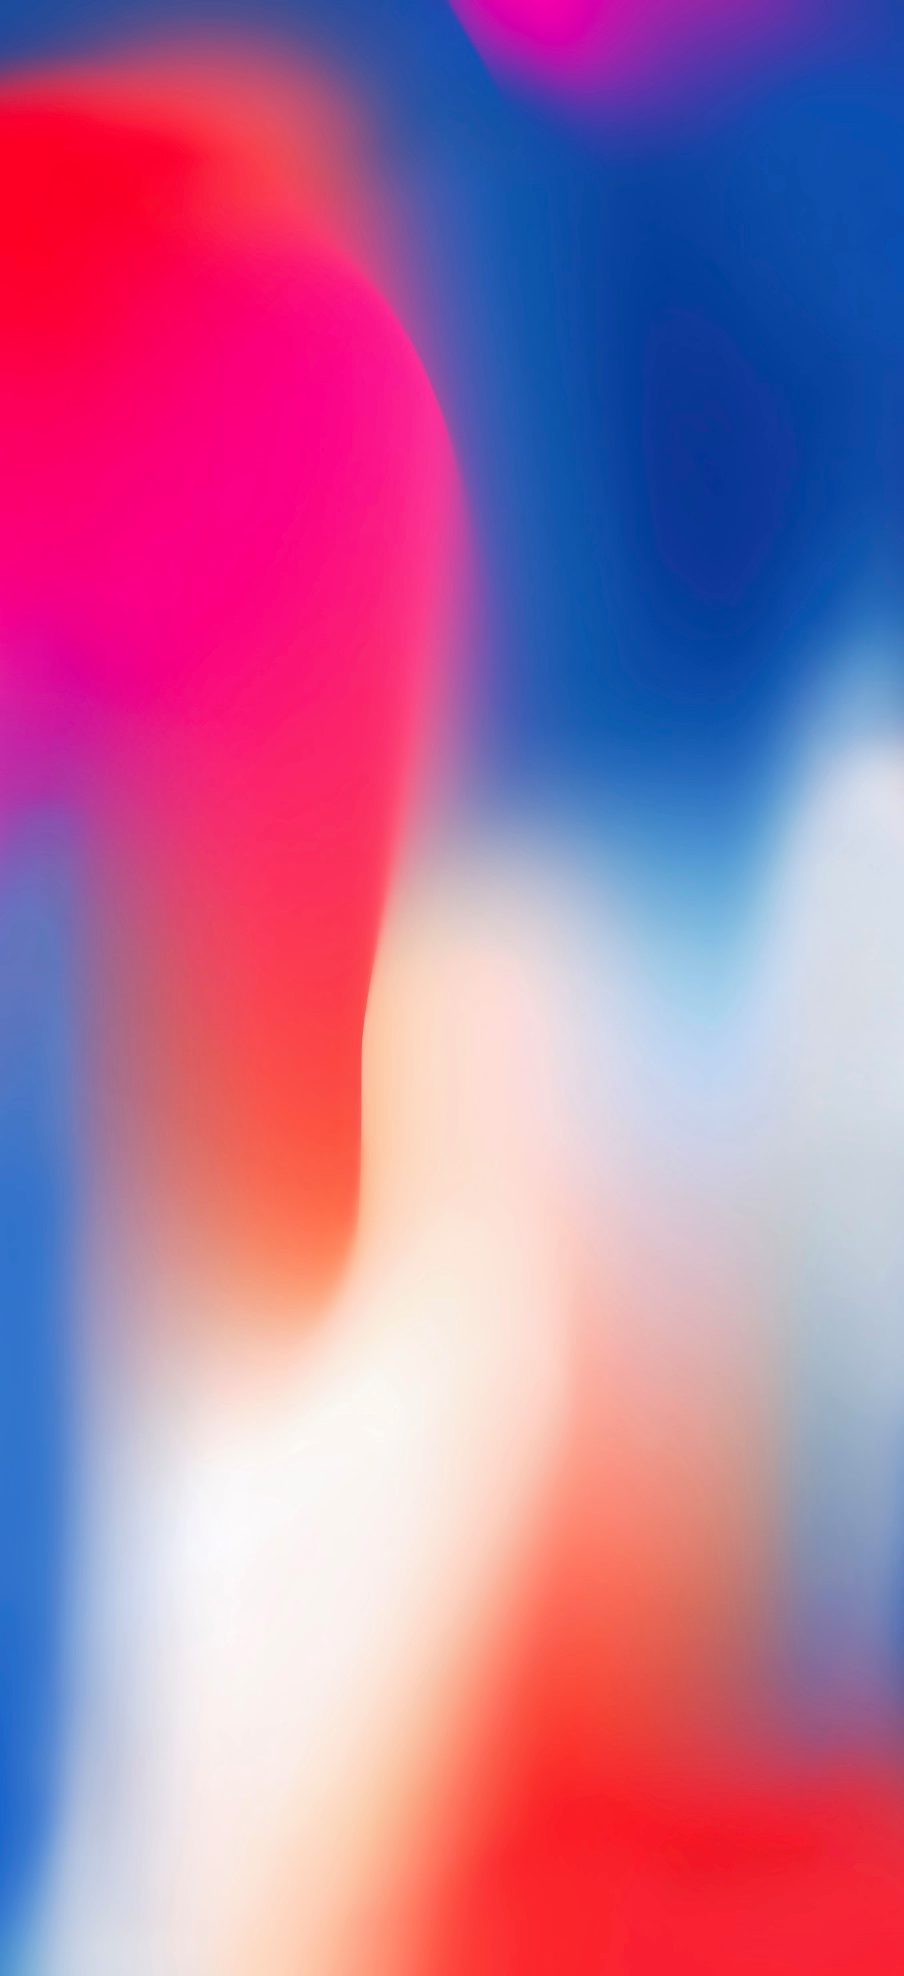 Download iPhone X Live Wallpapers for Android [Static